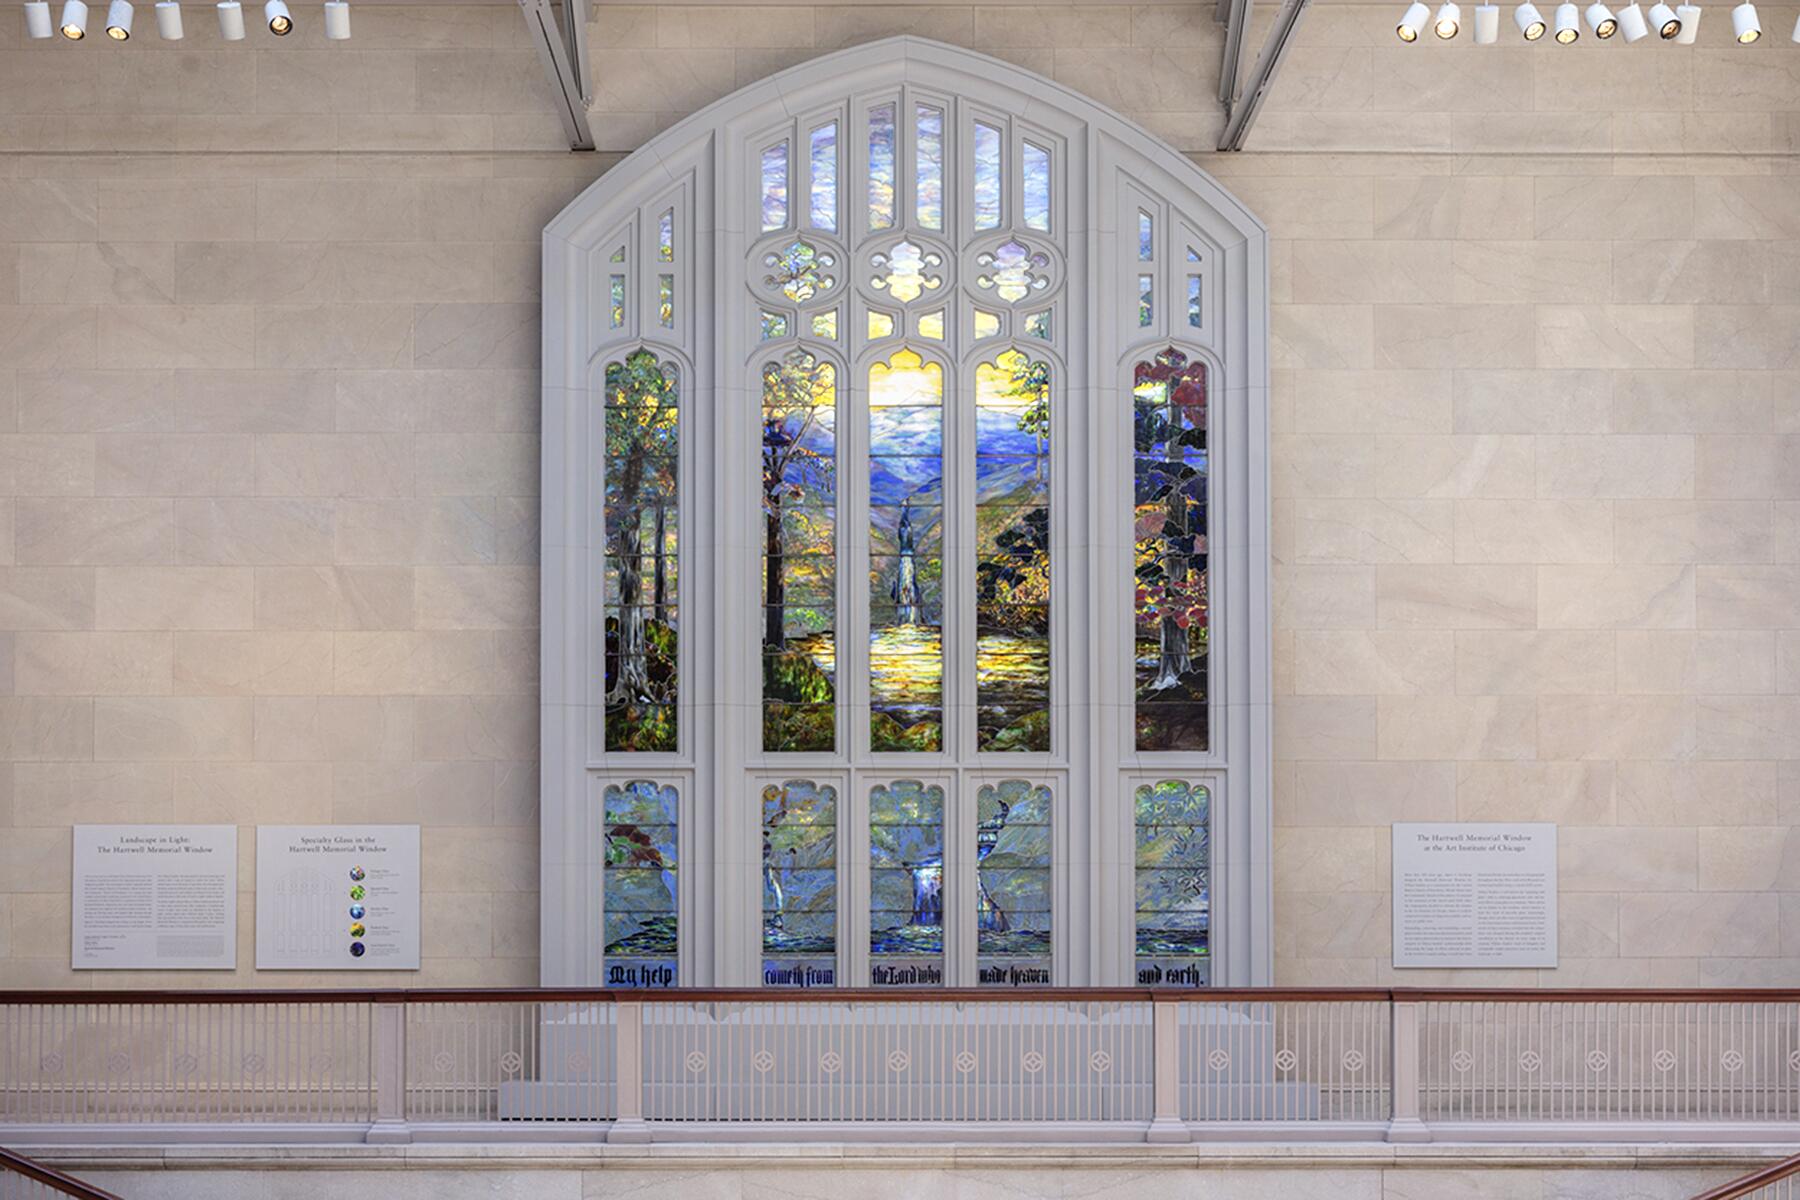 <a href='https://www.fodors.com/world/north-america/usa/illinois/chicago/experiences/news/photos/how-to-see-chicagos-best-architecture#'>From &quot;13 Ways to See Chicago's Best Architecture: Tiffany Window at Art Institute of Chicago&quot;</a>